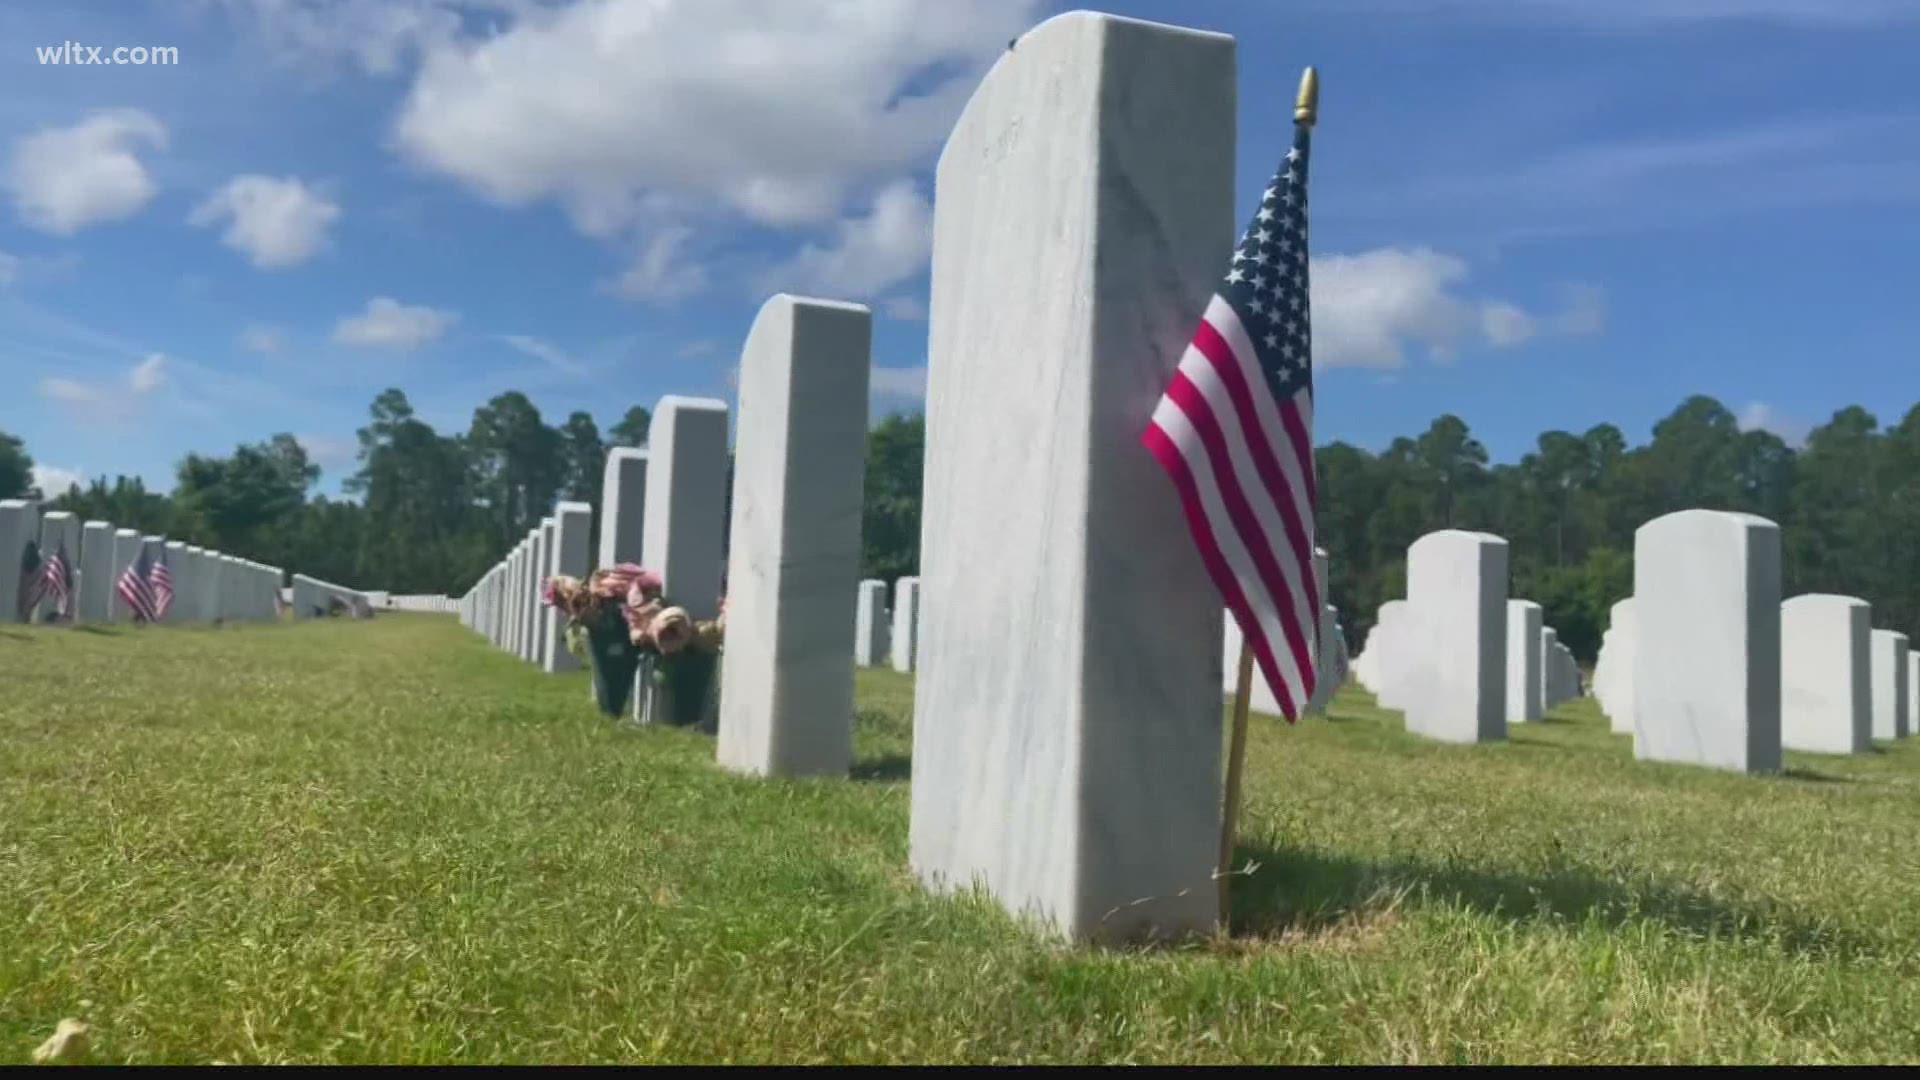 The cemetery is looking for people who will help place American flags at gravesites.